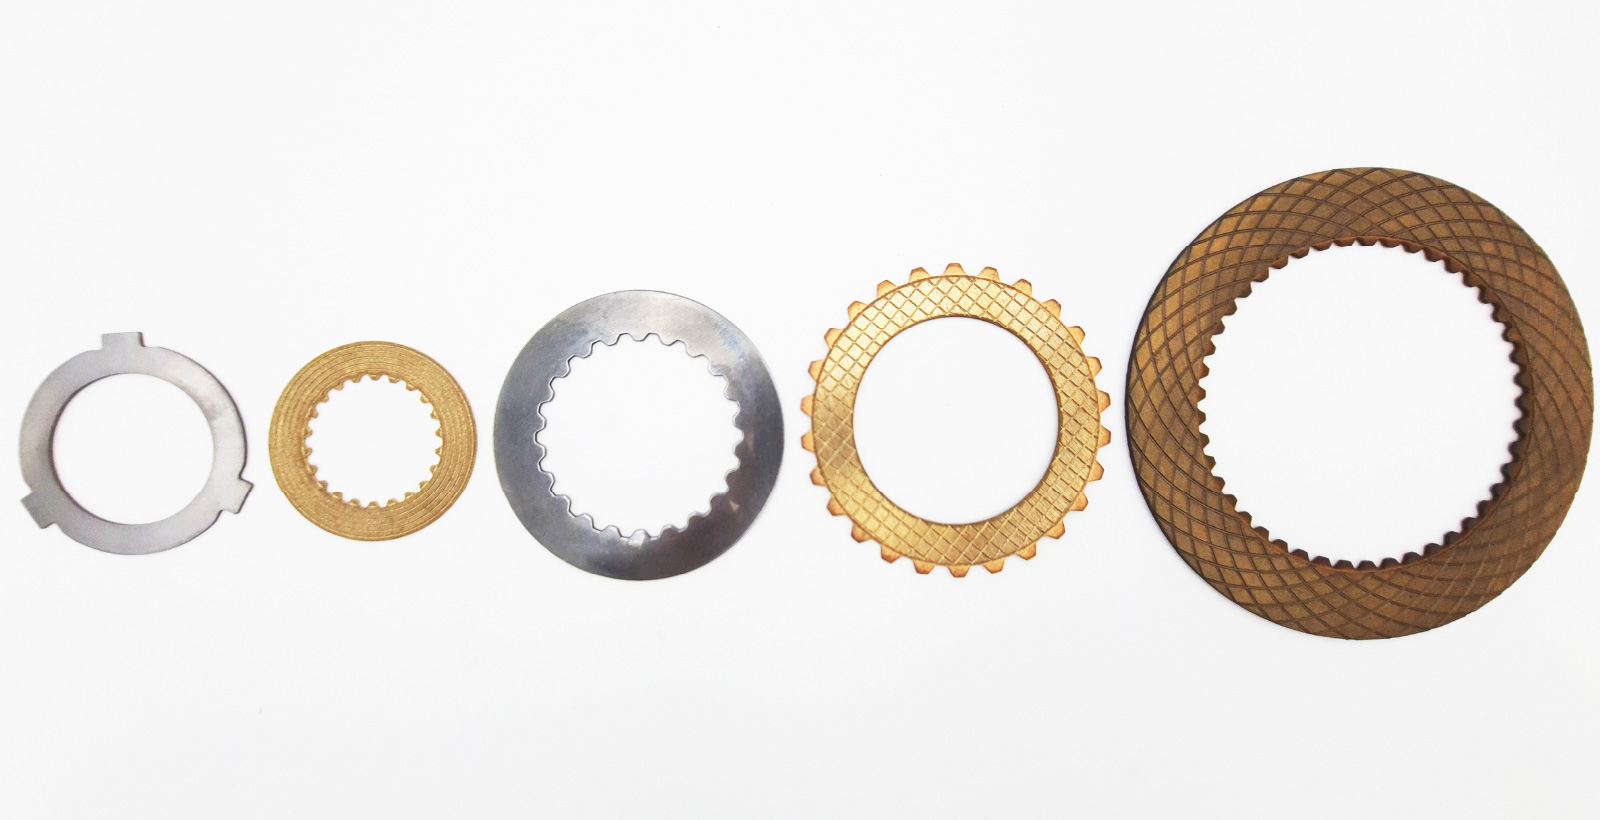 Ceramic Transmission Discs for Forestry and Timber Industry